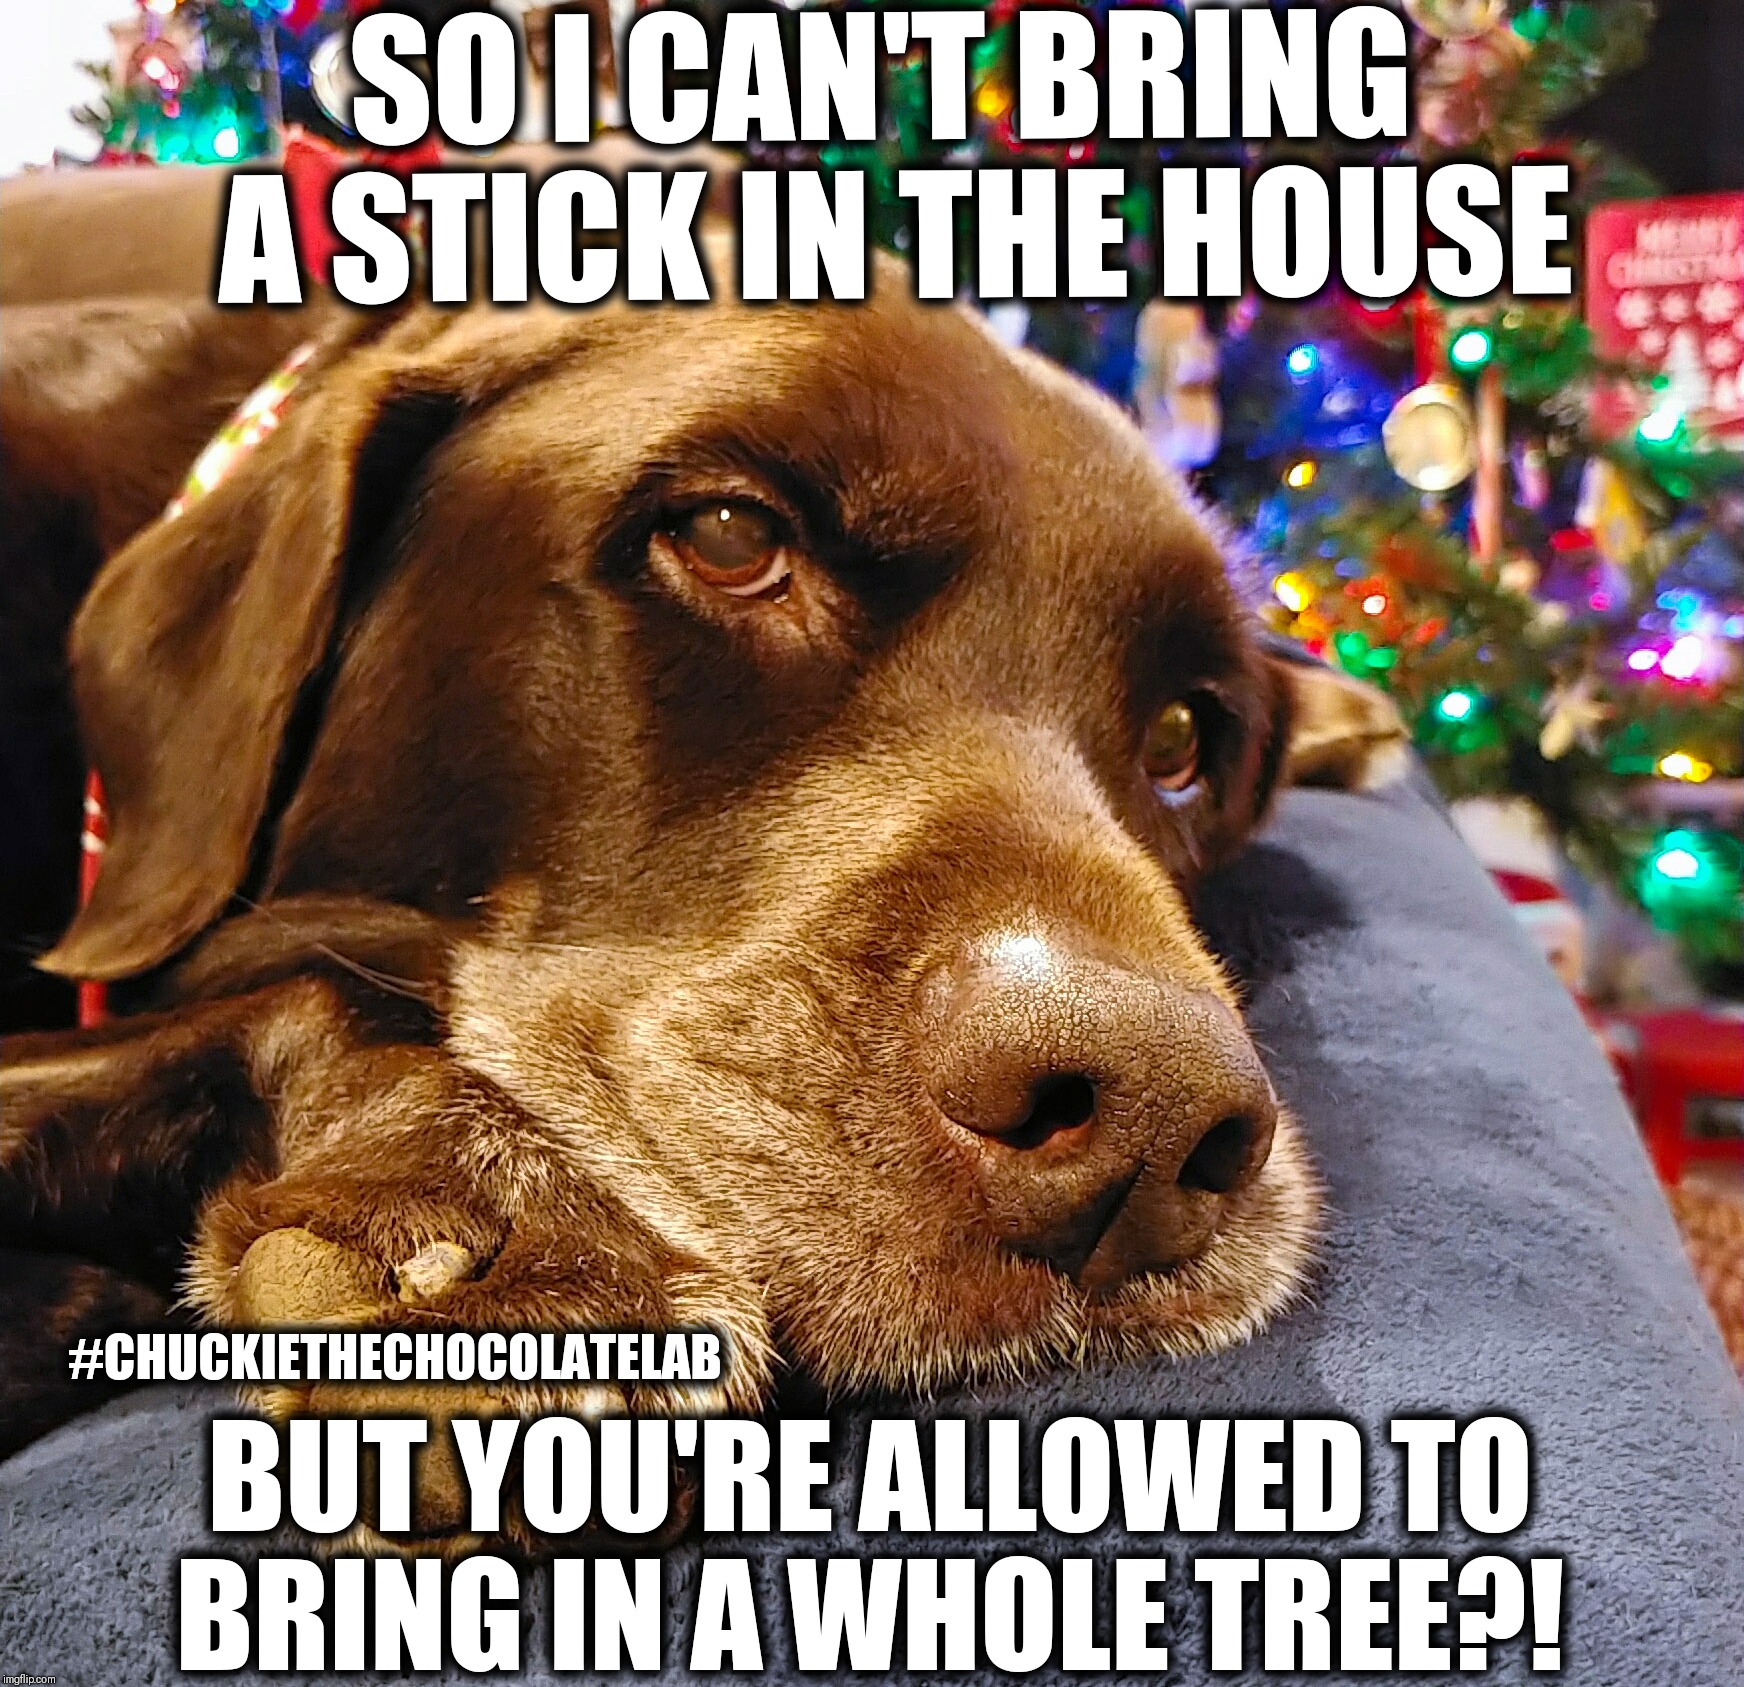 Christmas tree complaint | SO I CAN'T BRING A STICK IN THE HOUSE; #CHUCKIETHECHOCOLATELAB; BUT YOU'RE ALLOWED TO BRING IN A WHOLE TREE?! | image tagged in chuckie the chocolate lab,dogs,funny,memes,christmas,tree | made w/ Imgflip meme maker